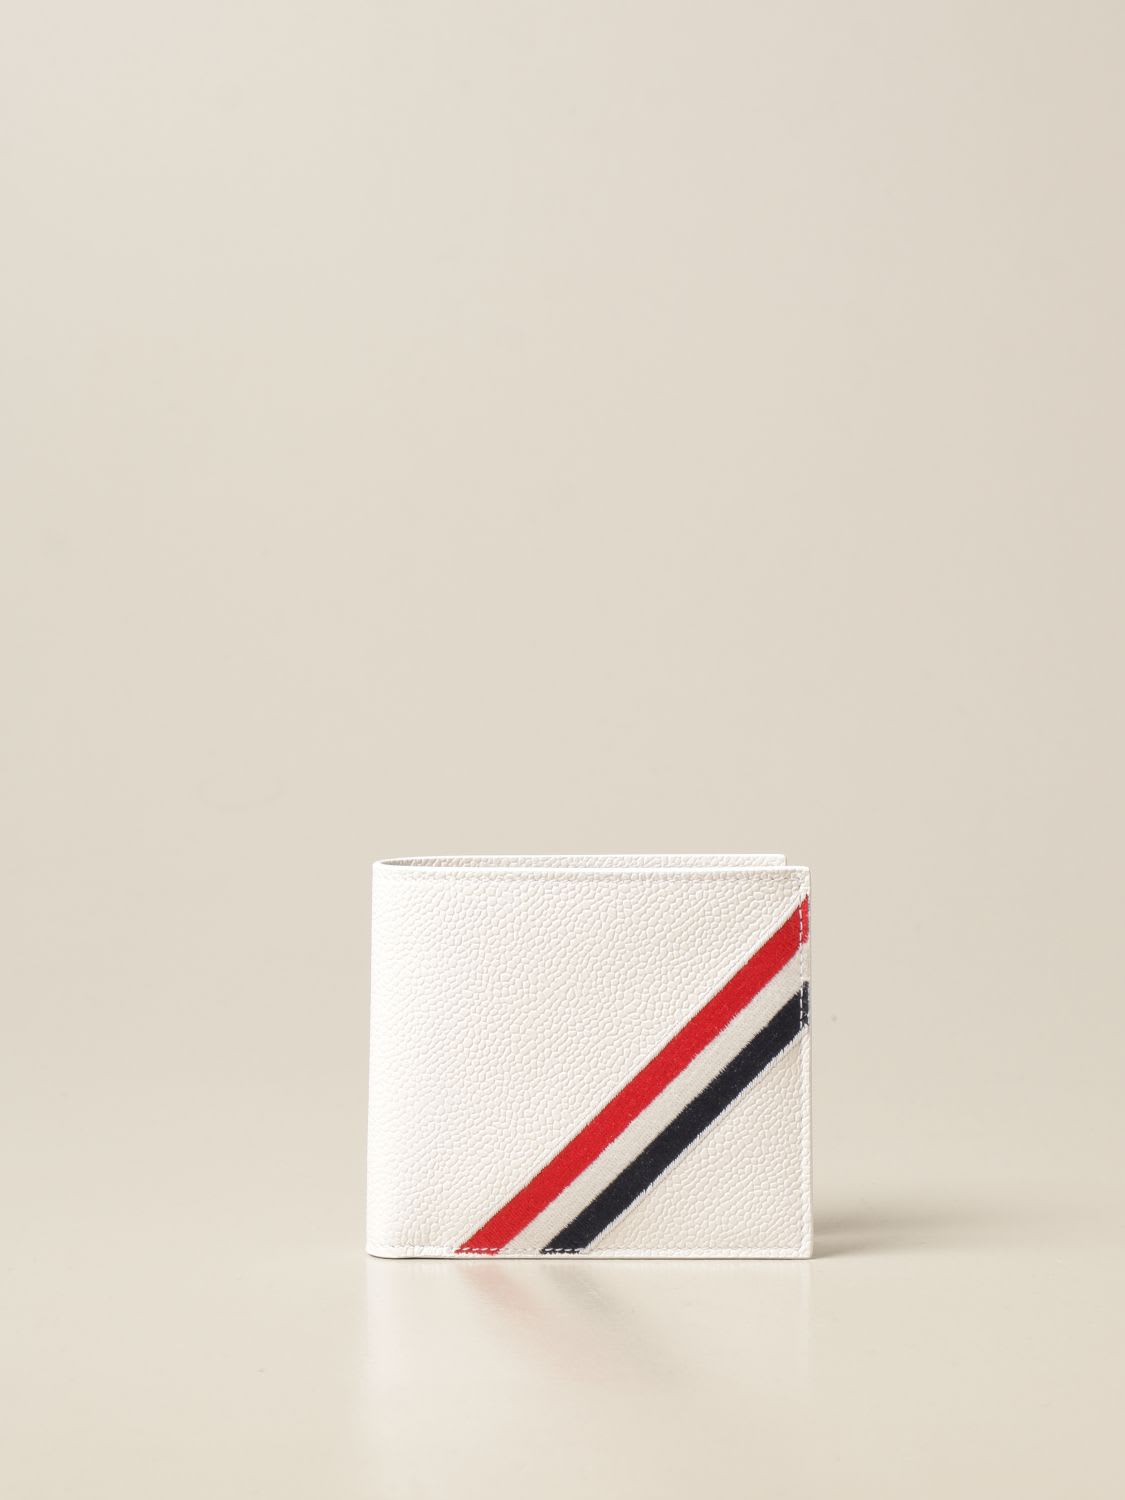 THOM BROWNE WALLET IN GENUINE GRAINED LEATHER,MAW226A 00198 100